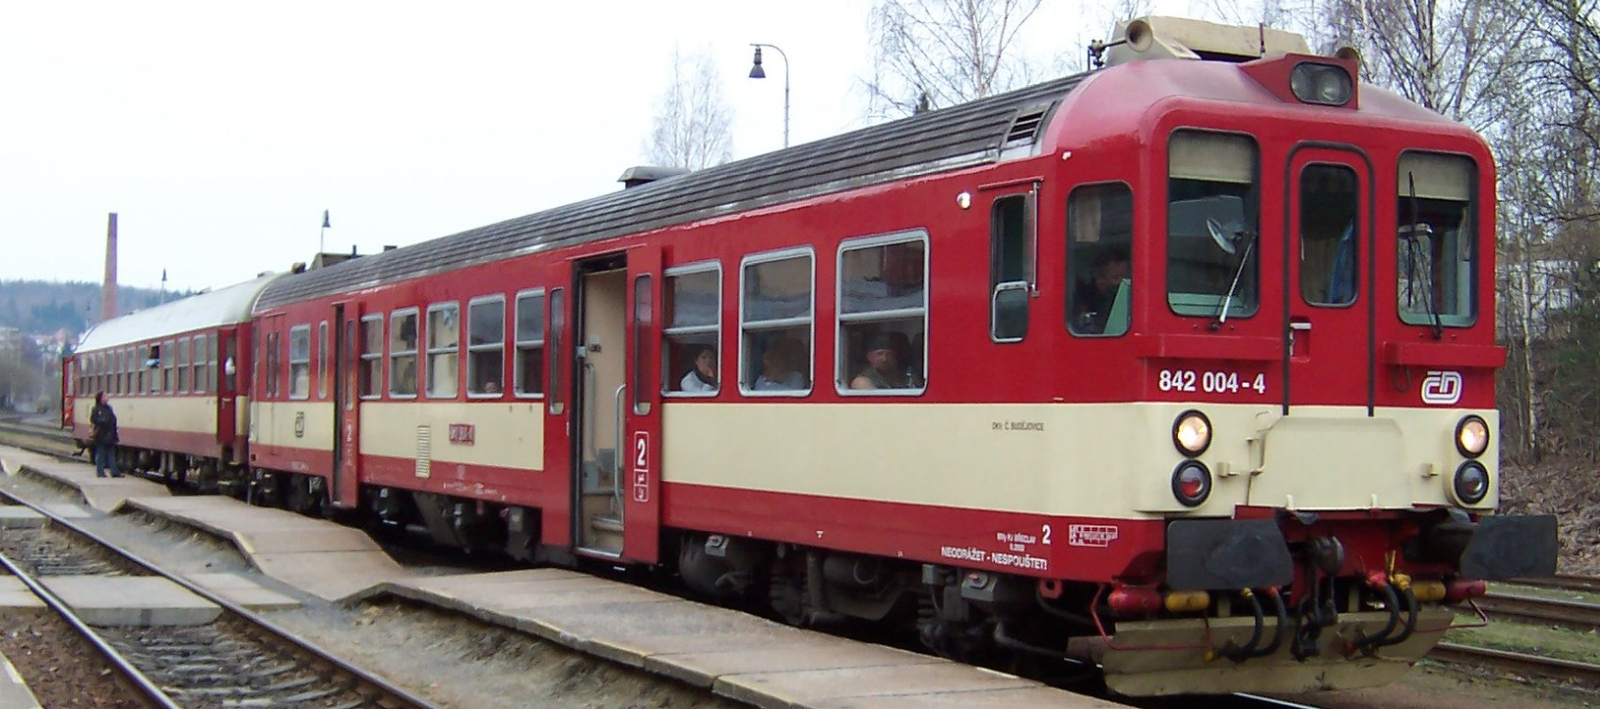 842 004 in April 2006 with an additional passenger car in Príbram